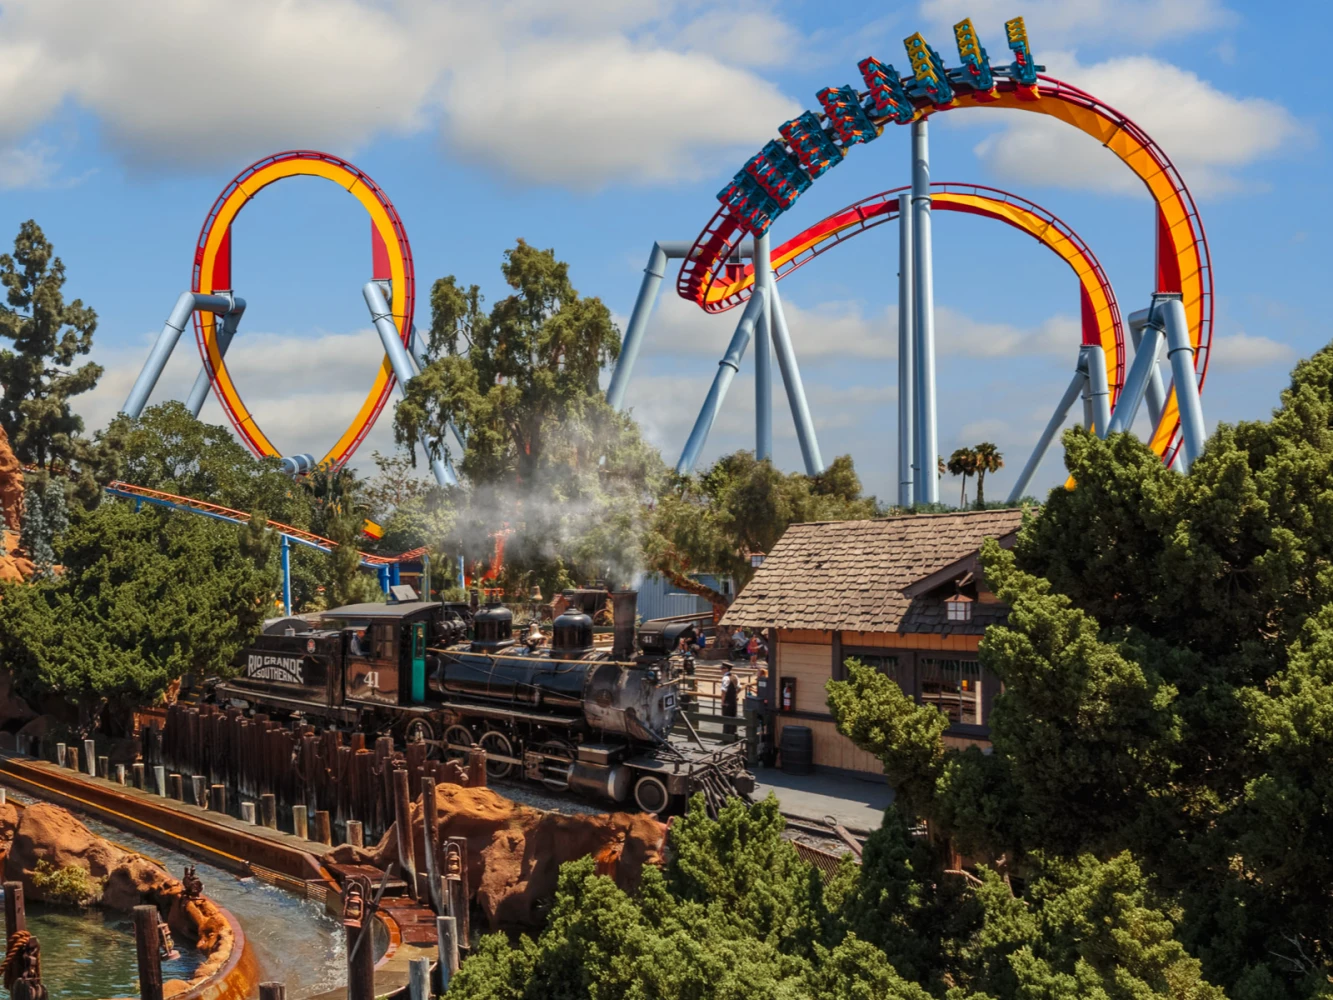 Knott's Berry Farm: What to expect - 1